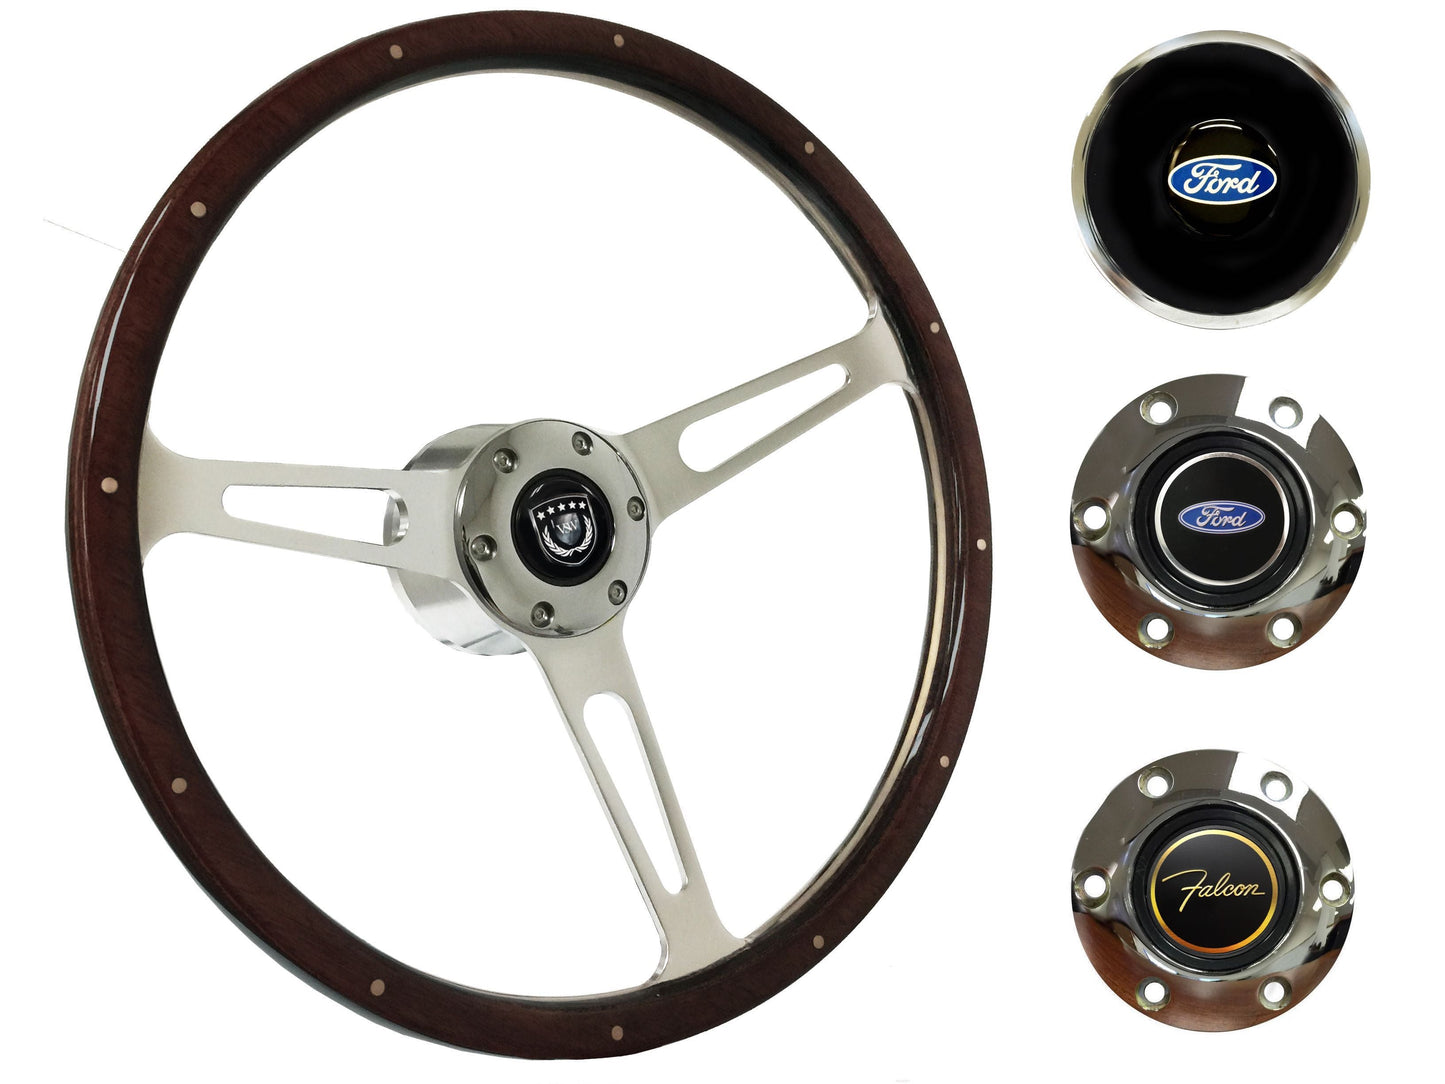 1965-69 Ford Falcon Steering Wheel Kit | Deluxe Espresso Wood | ST3553A